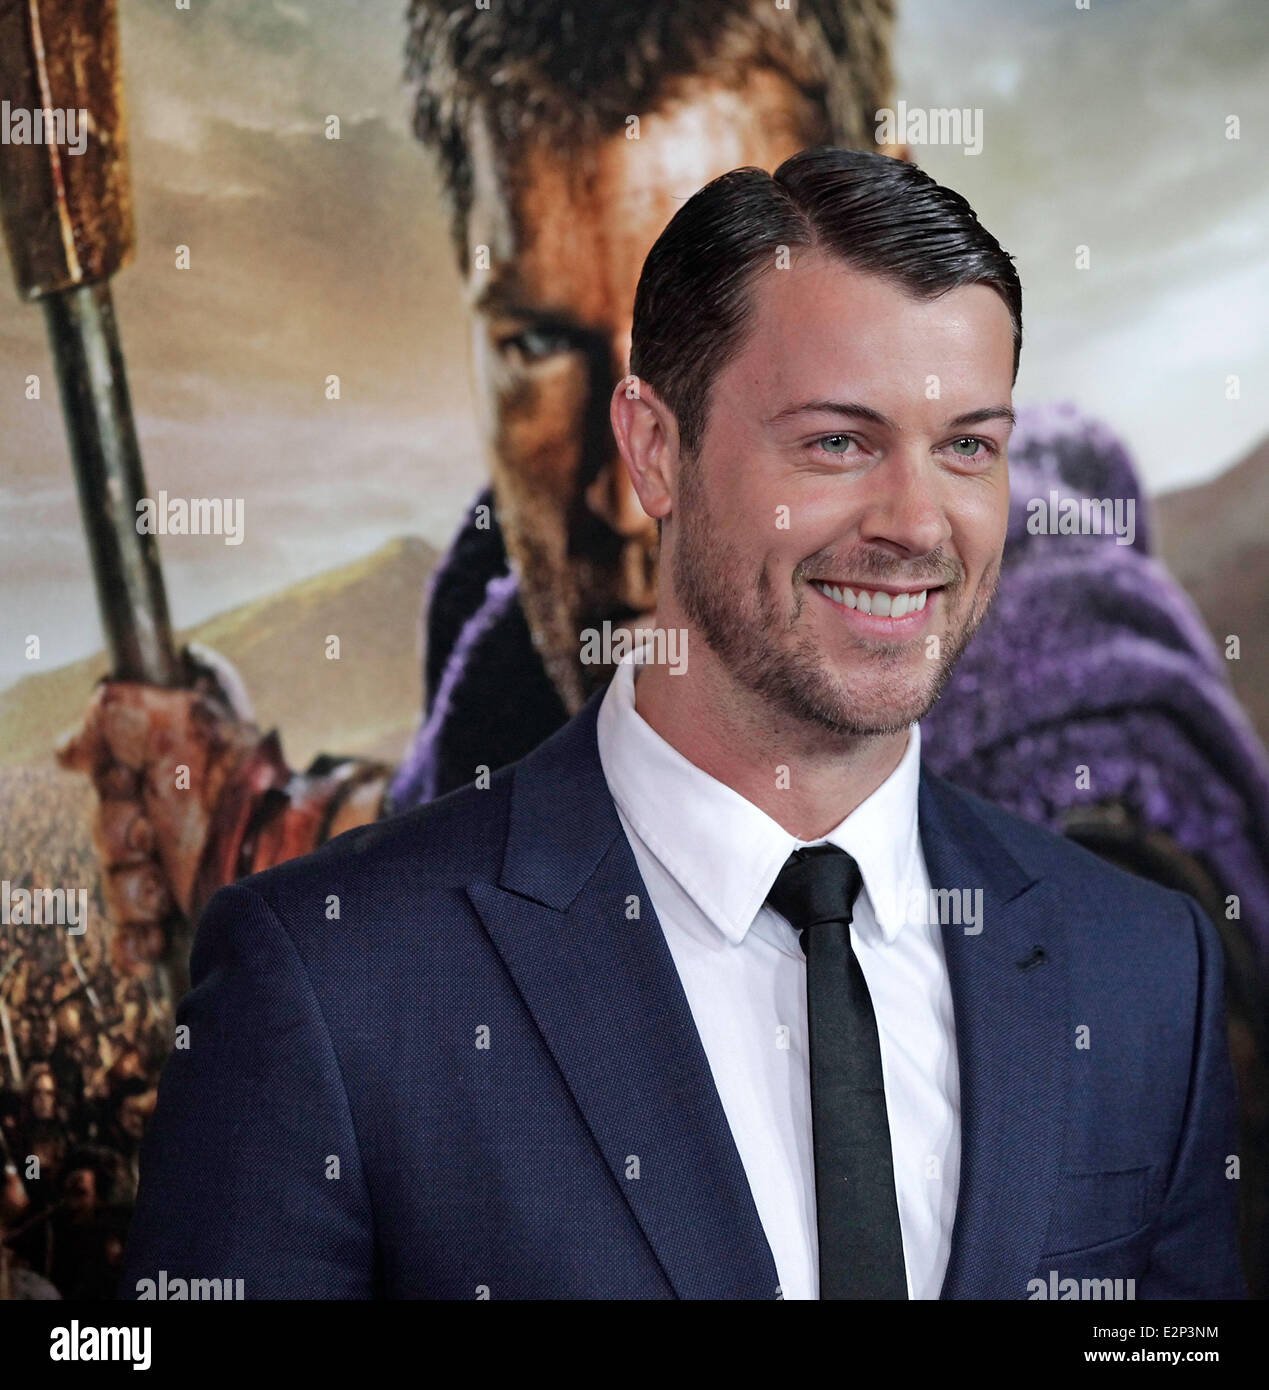 U.S. premiere screening of “Spartacus: War of the Damned” at Regal Cinemas L.A. LIVE Stadium 14  Featuring: Daniel Feuerriegel Where: Los Angeles, California, United States When: 22 Jan 2013 Stock Photo